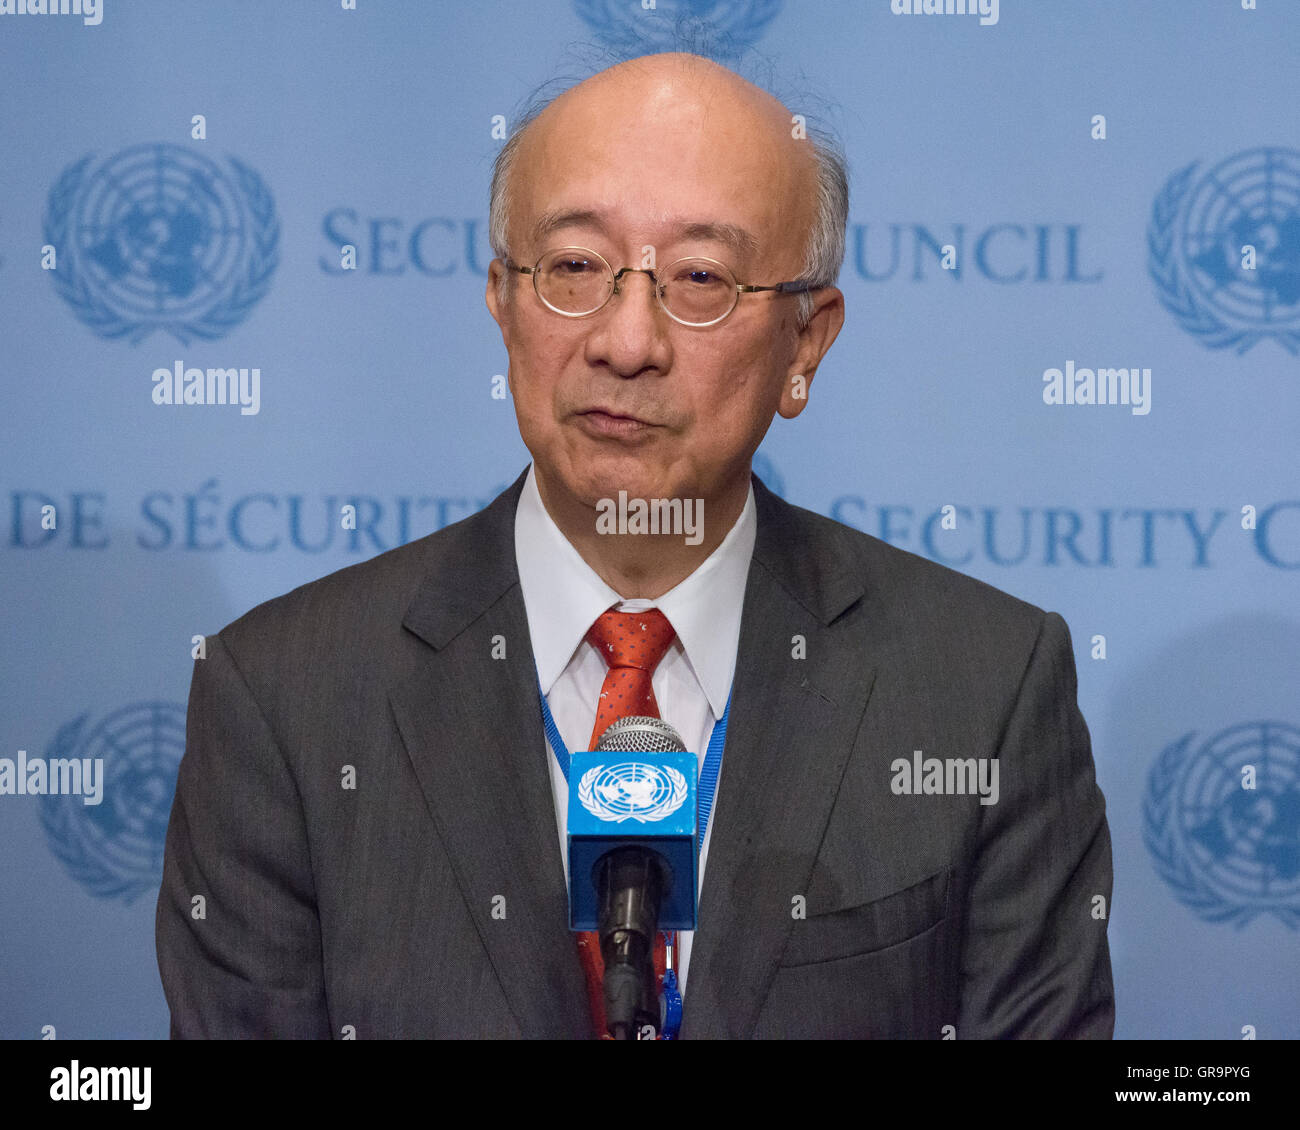 Japanese Ambassador to the United Nations Koro Bessho speaks with the press. Following the September 5th test launch of what are believed to by three medium-range Rodong-class ballistic missiles by the Democratic People's Republic of Korea (DPRK) toward Japan, the United Nations Security Council held emergency consultations on the incident. Analysts believe that the test, conducted while world leaders met in China for the G20 summit, may have been conducted as a response to the possible installation of a Terminal High Altitude Area Defense (THAAD) system developed to defend South Korea against Stock Photo